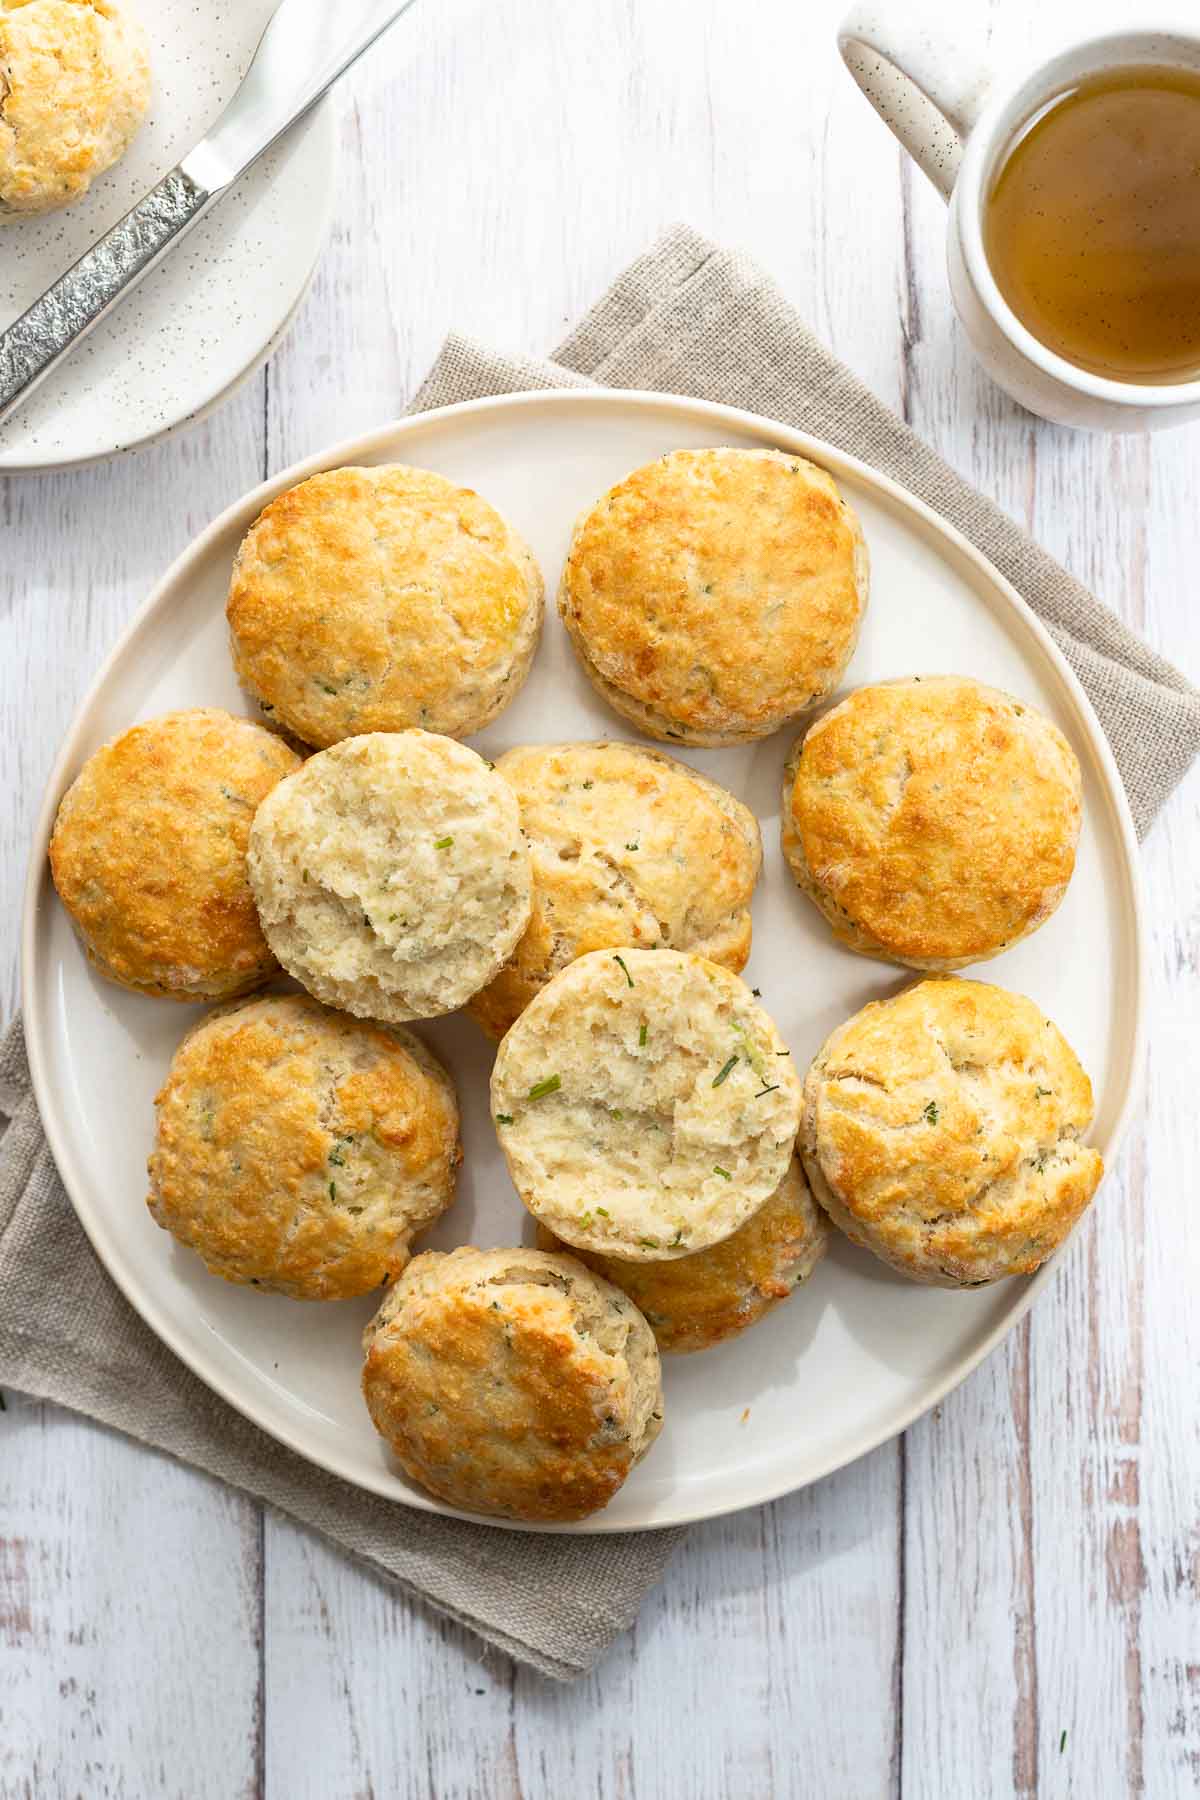 Biscuits recipe with Cheddar Cheese and Chives 